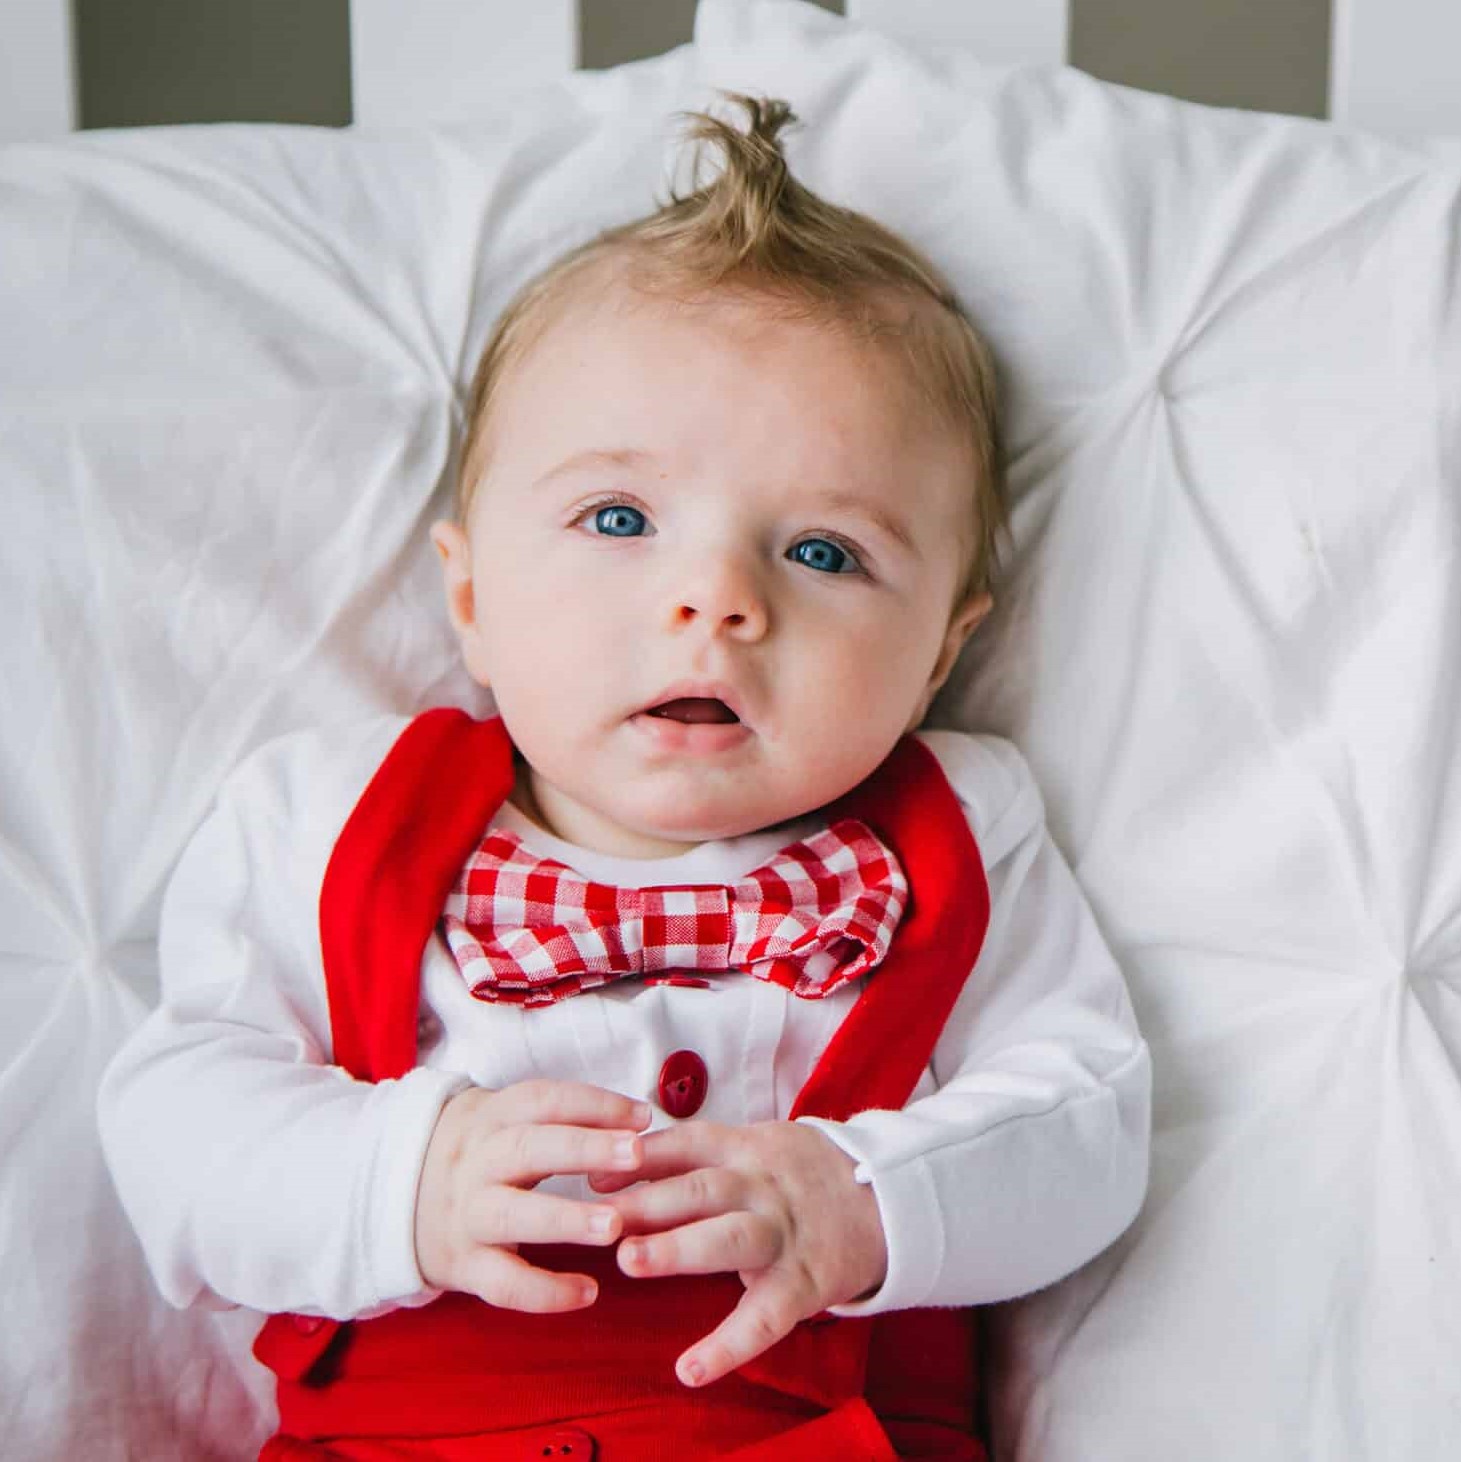 long sleeve maroon and white baby tuxedo bow tie cumber bun baby wedding outfit leggings baby tuxedo outfit wedding suspenders